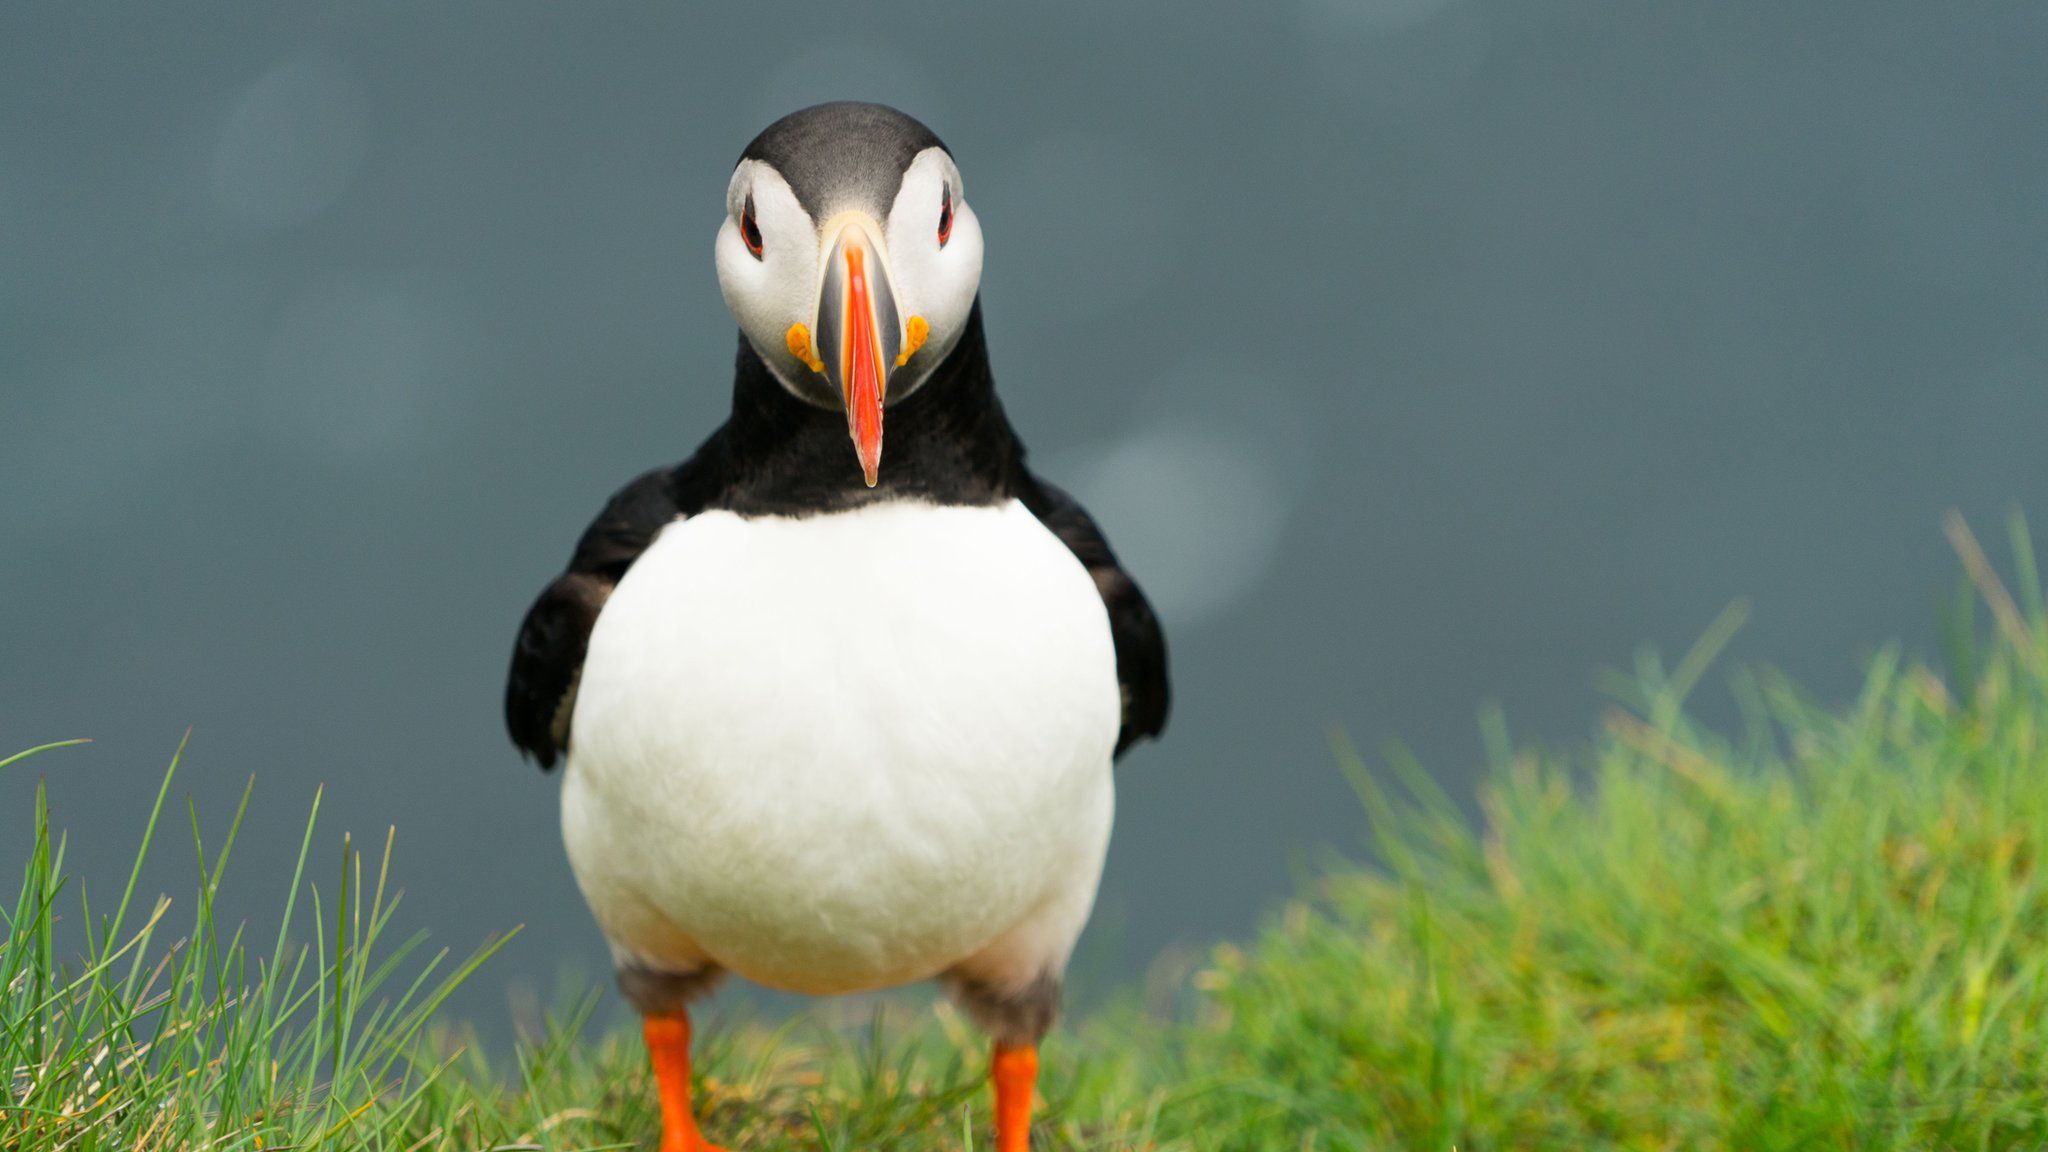 puffin-on-grass